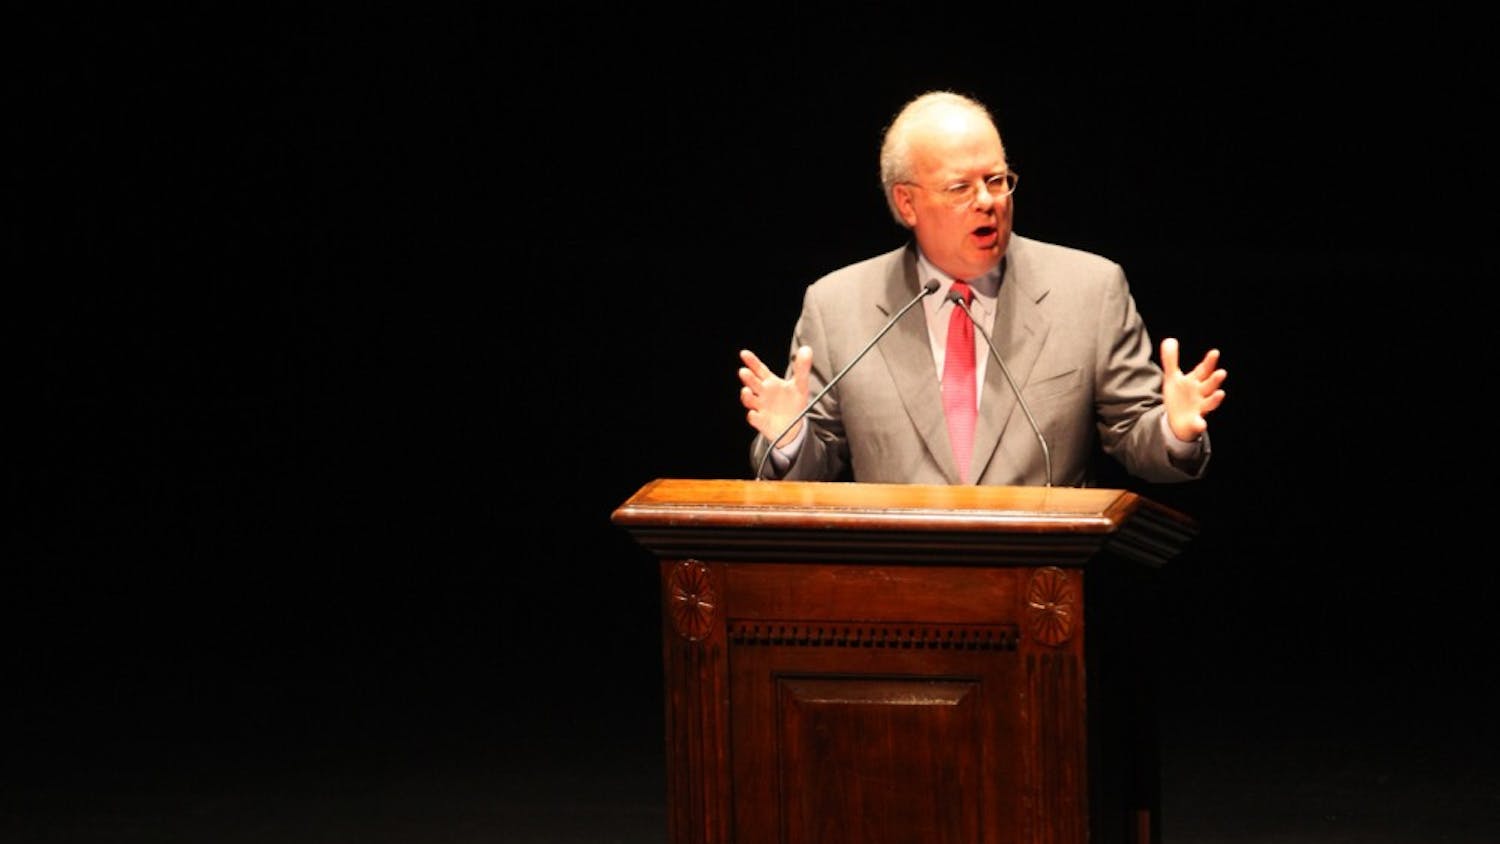 Karl Rove, adviser to former President George W. Bush, speaks at Memorial Hall Monday. The event was sponsored by UNC College Republicans.